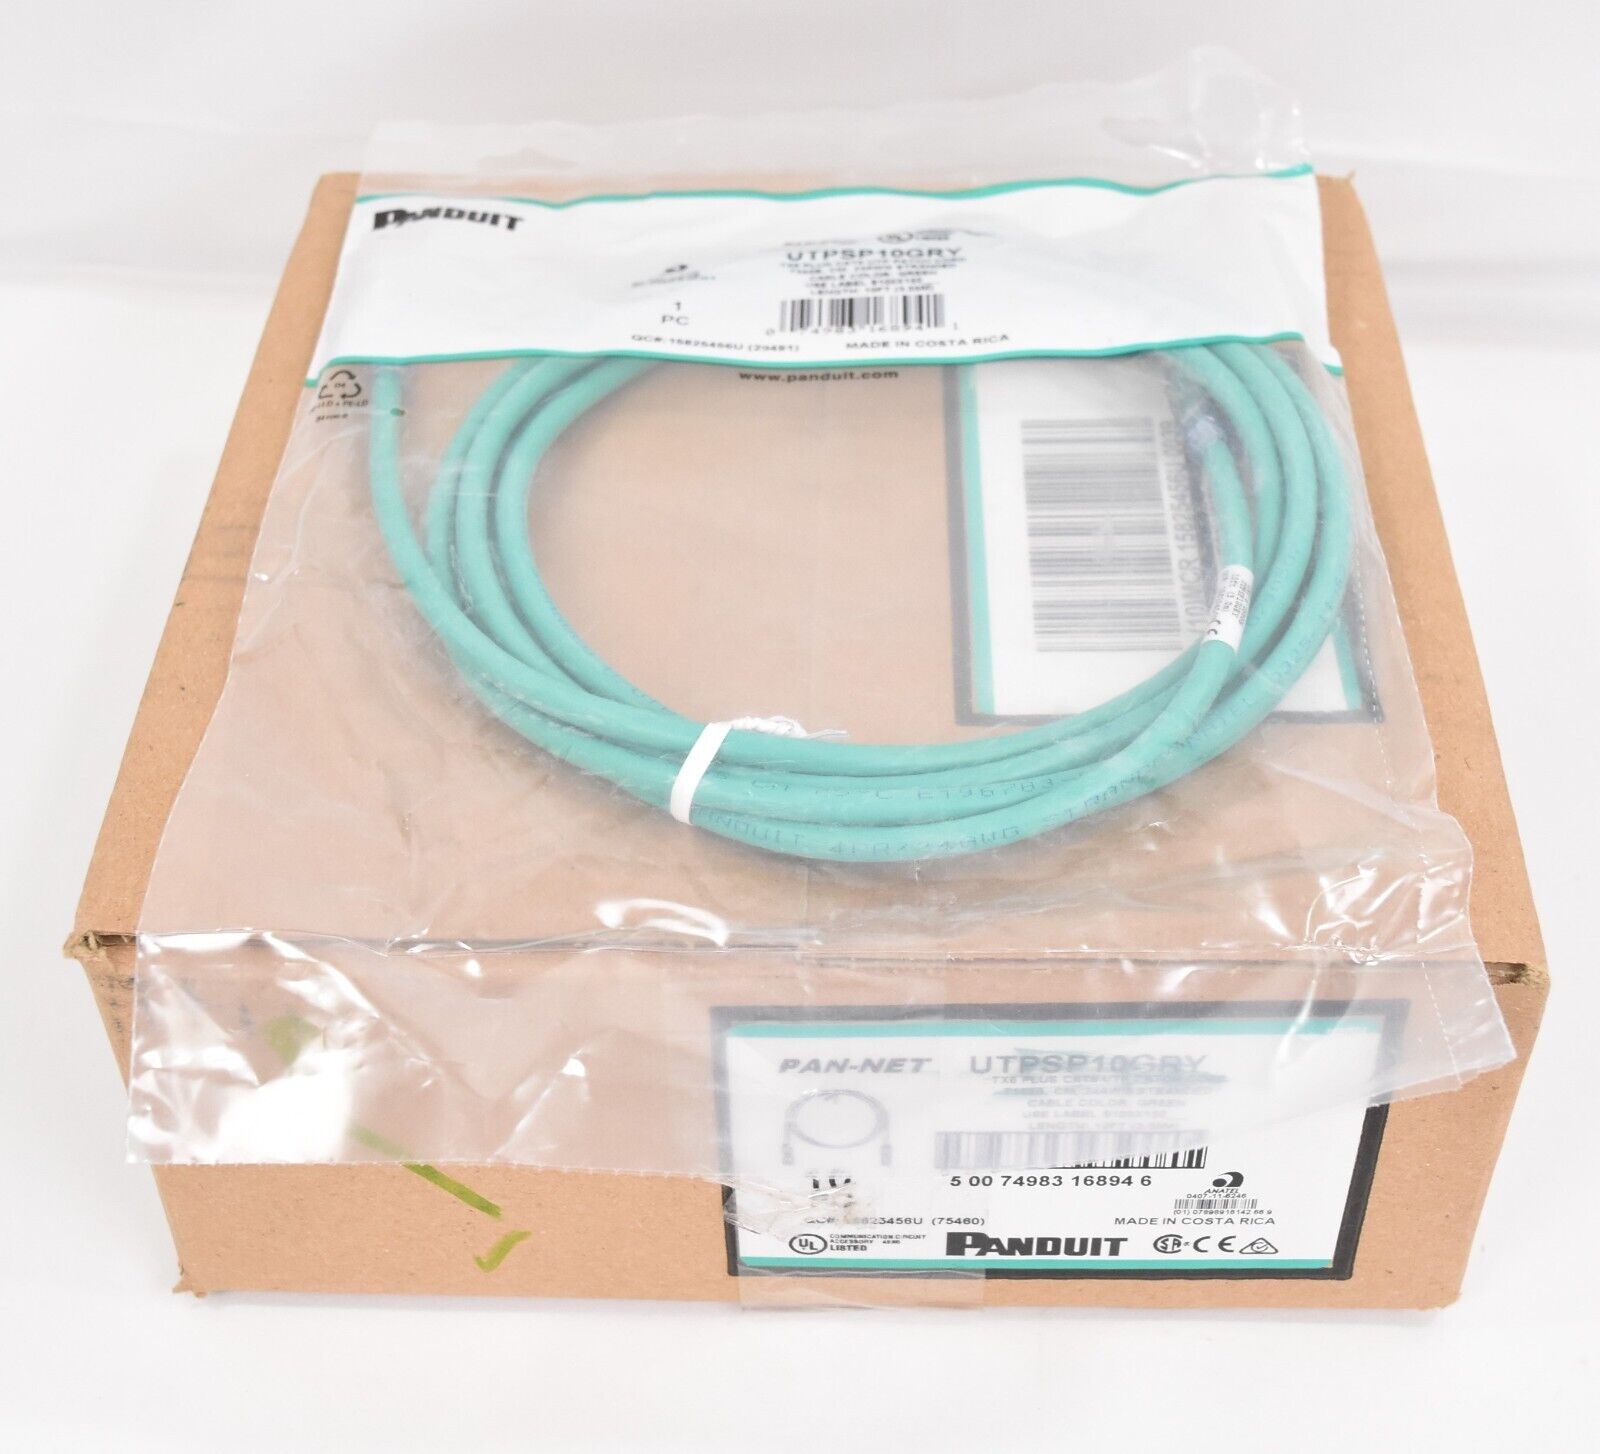 Box of (10) Panduit 10 Ft Green RJ45 Cat 6 Ethernet Patch Cables UTPSP10GRY